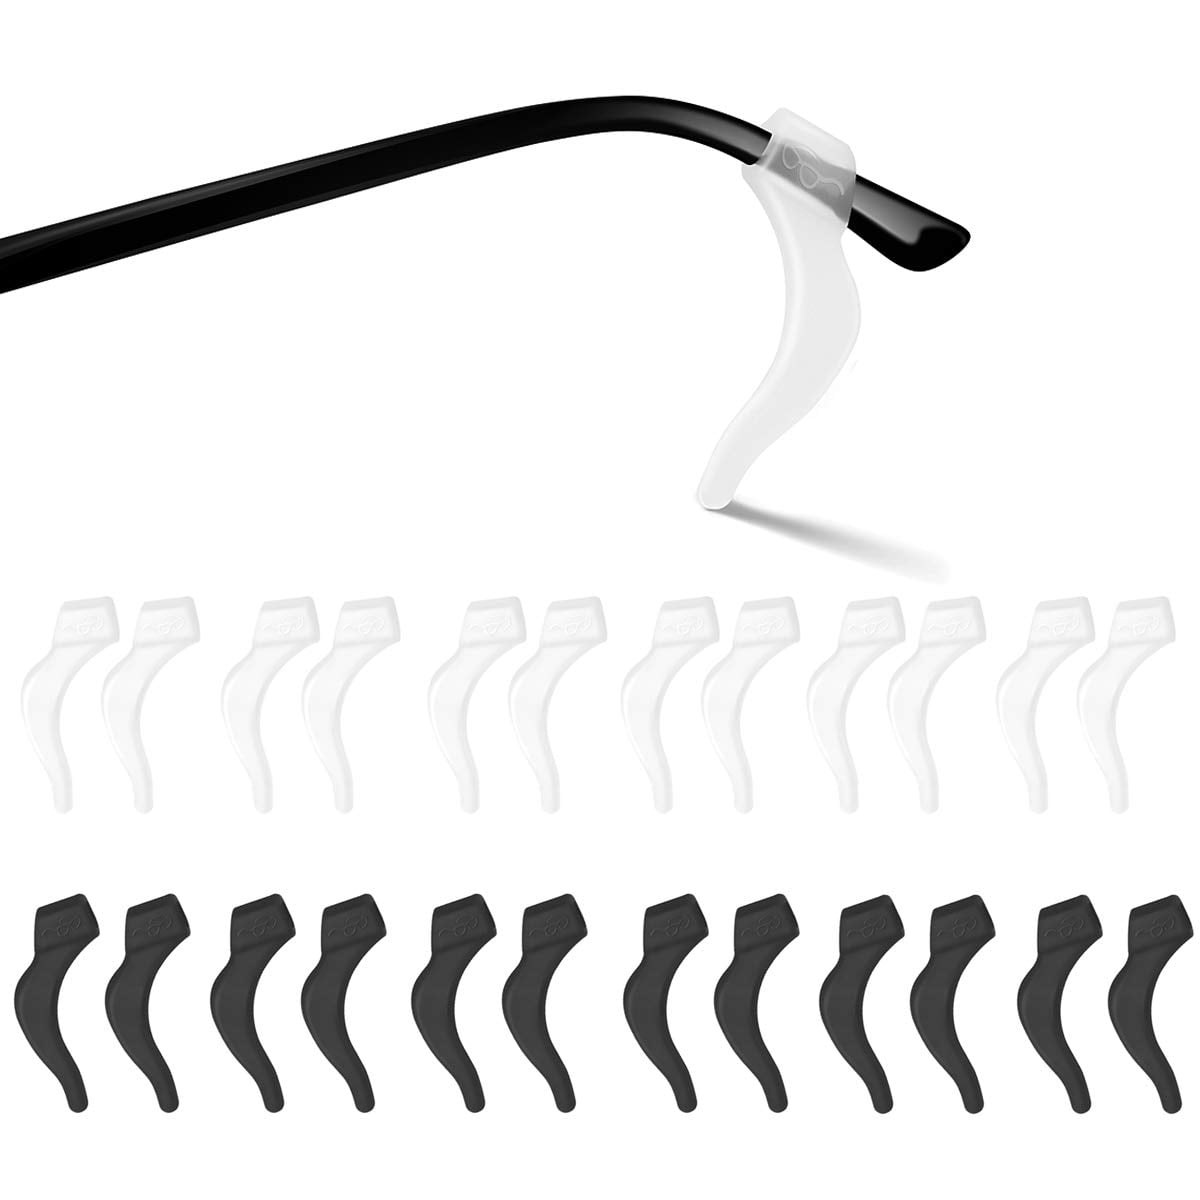 Details about   Anti Slide Sunglasses Ear Sleeve Retainer Prevents Eyeglass from Slipping Black 